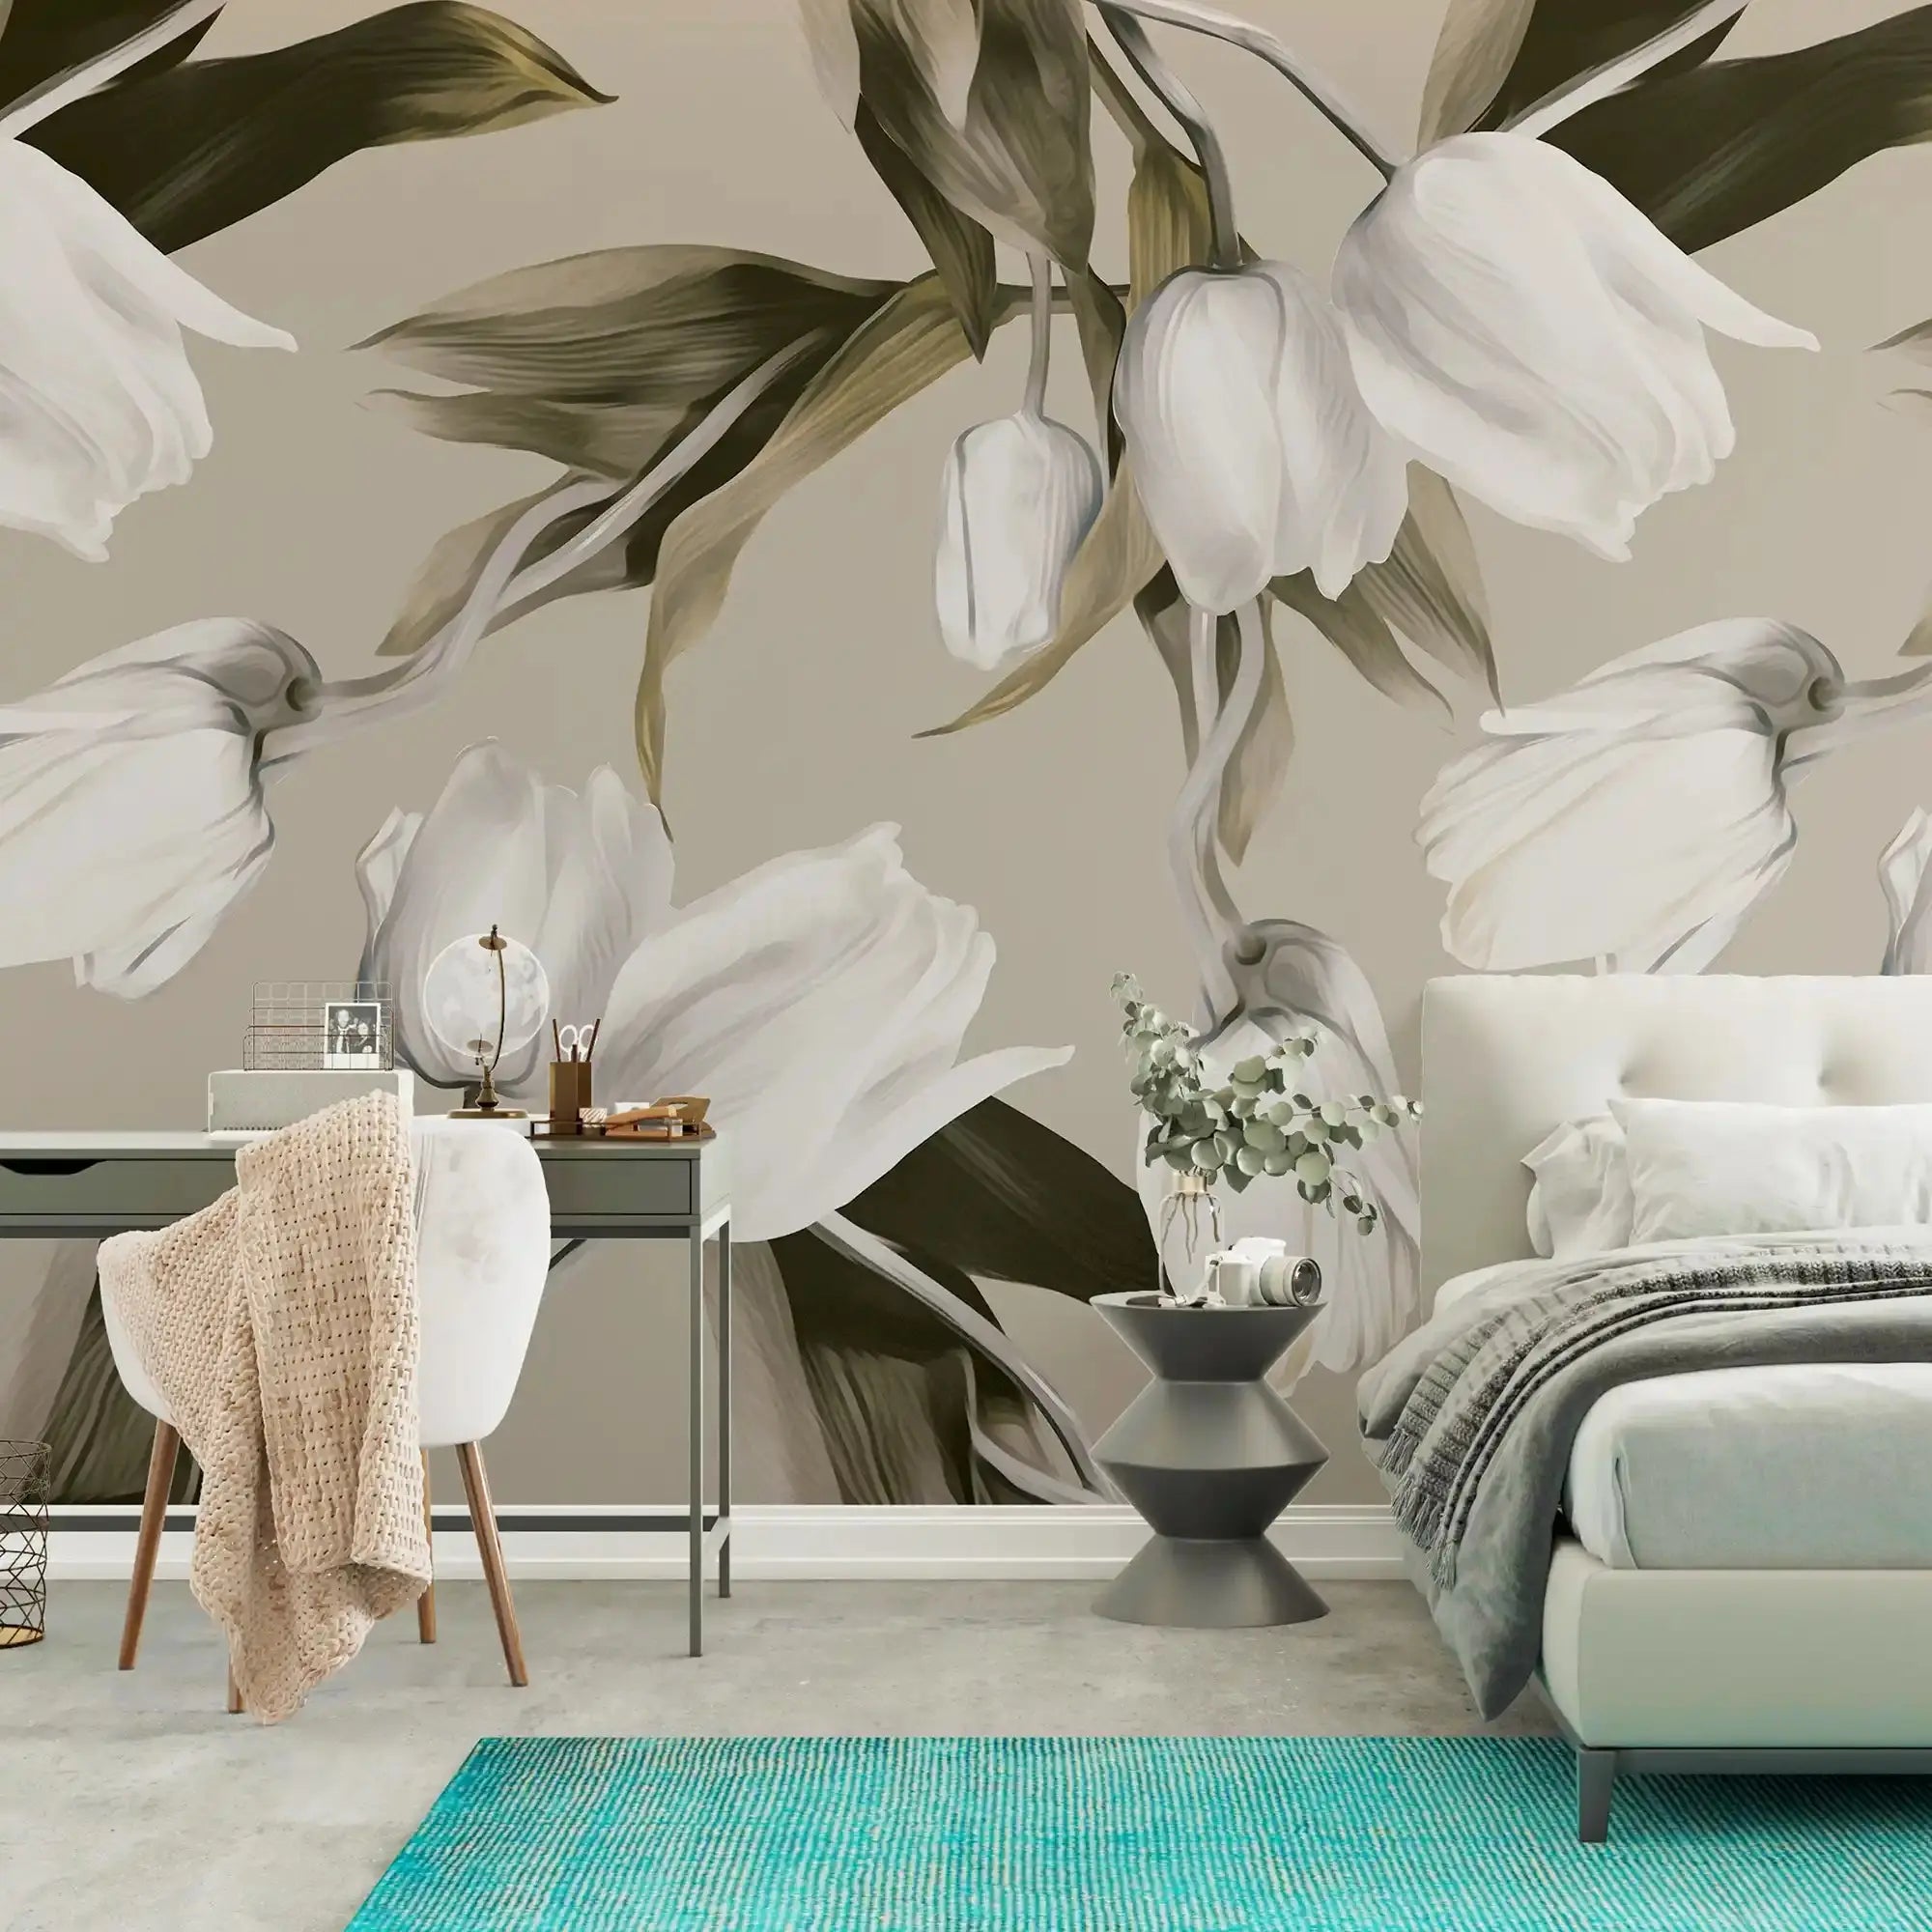 3094-B / Abstract Floral Peel and Stick Wallpaper, Tulips Modern Design Mural for Walls - Artevella